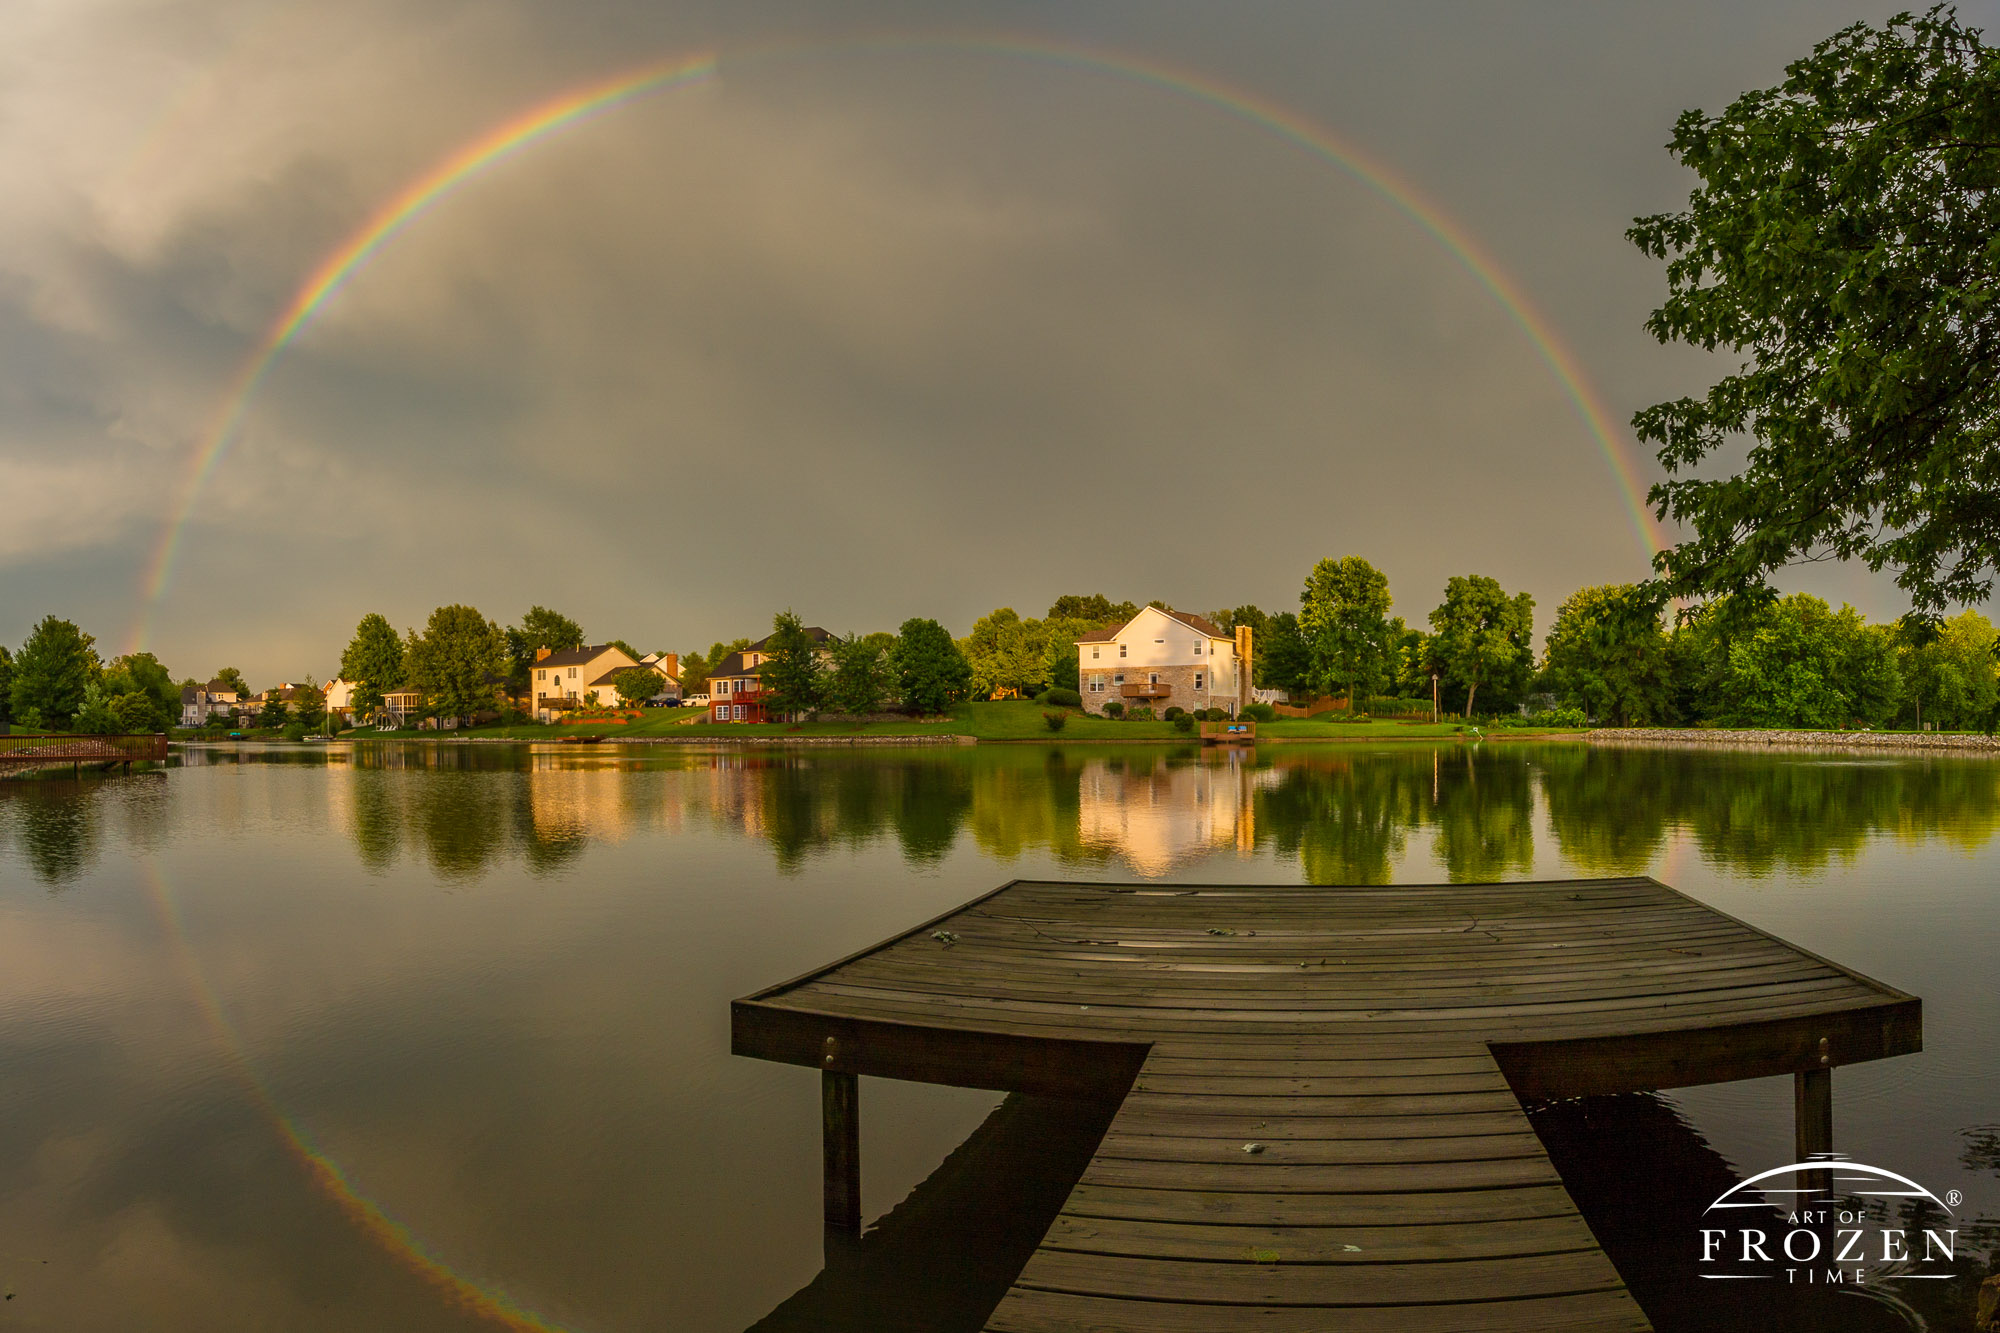 A full rainbow looking out from a small dock onto a pond where the surface waters reflected the optical delight created a full circle rainbow.